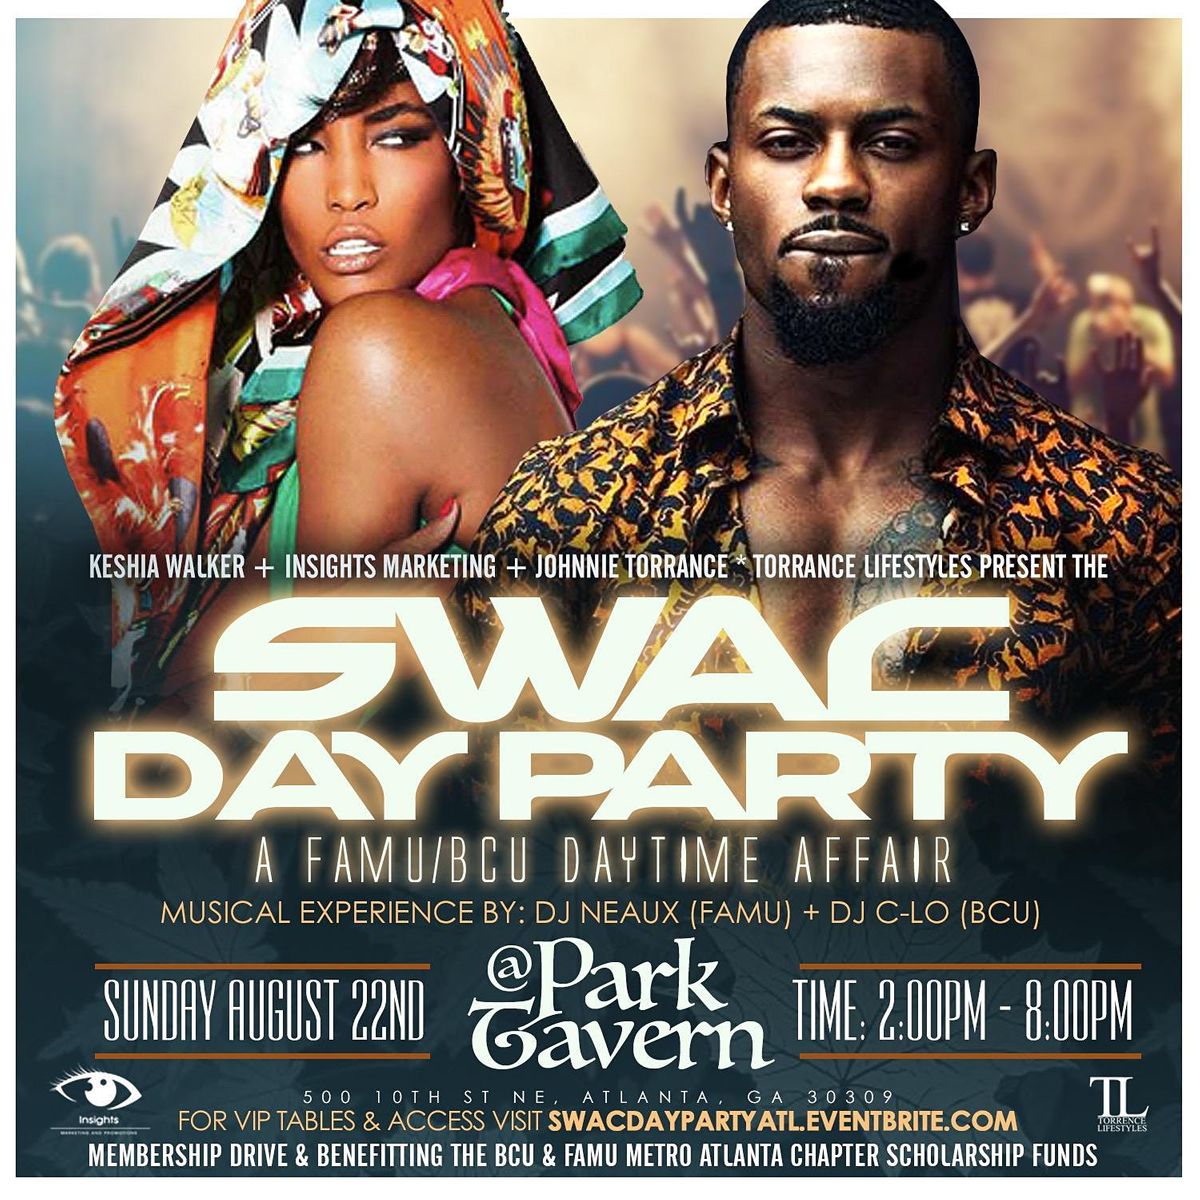 FAMU\/BCU WELCOME TO THE SWAC DAY PARTY